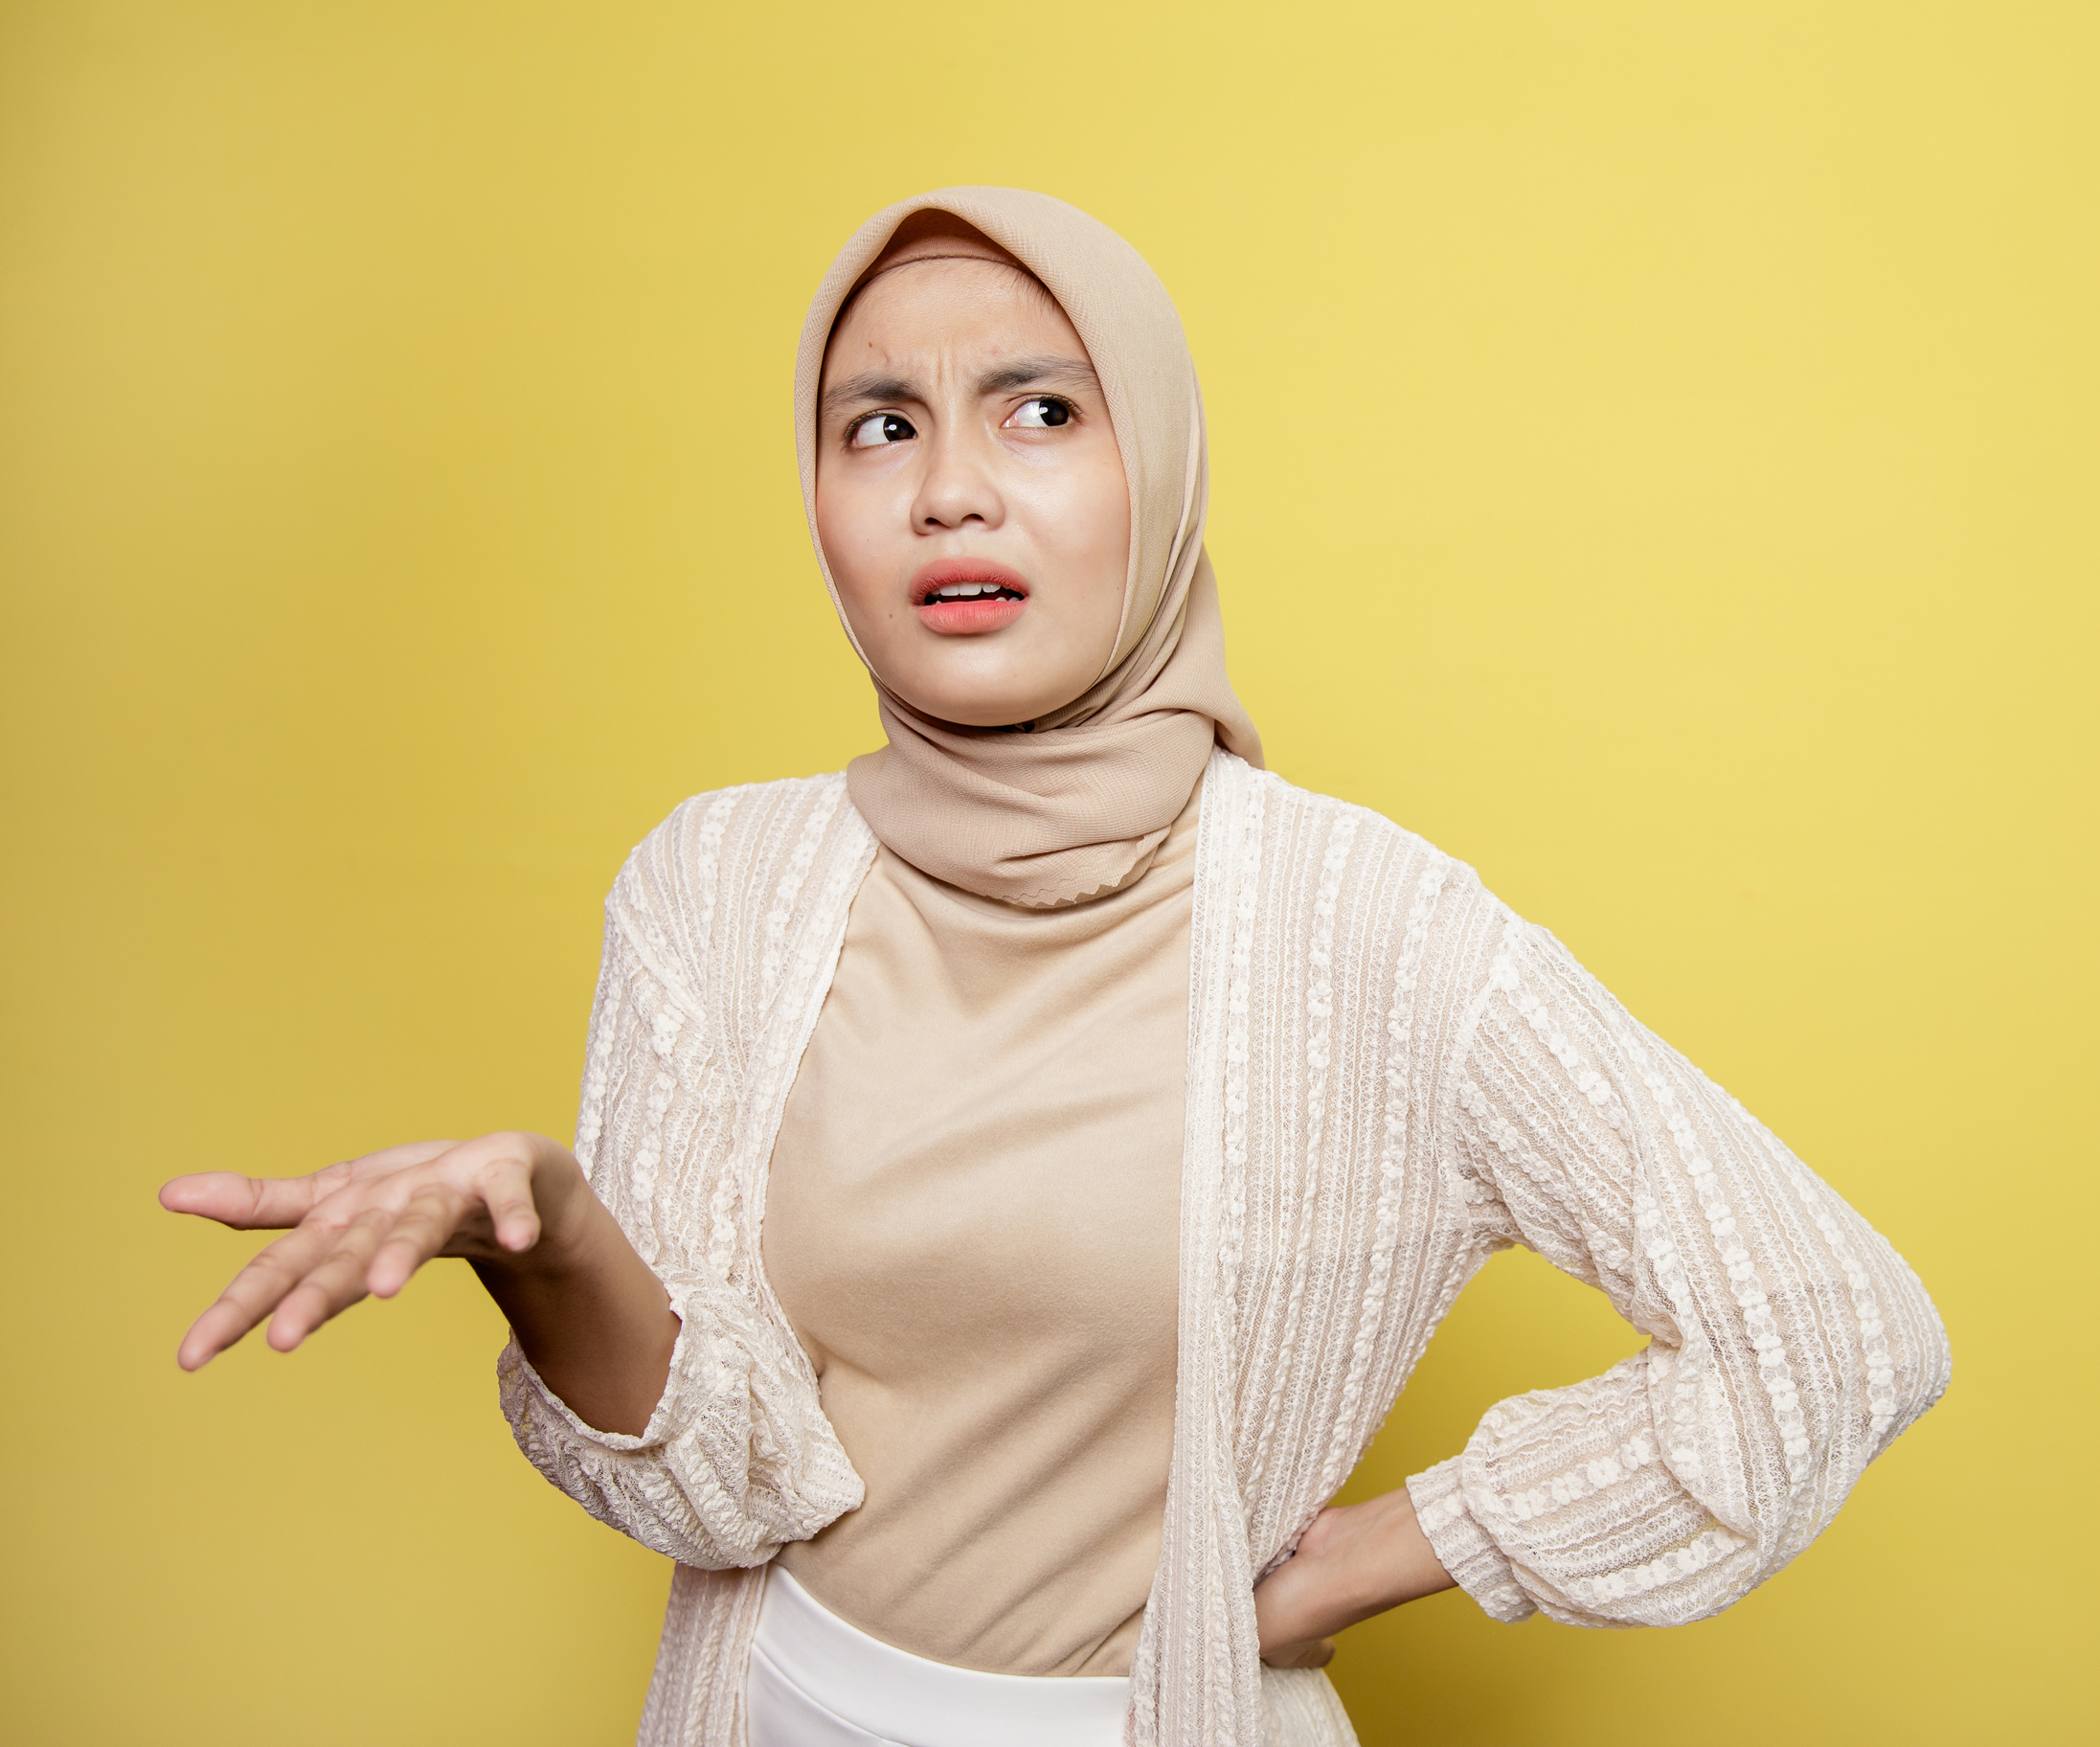 Asian Hijab Women Confuse Expression